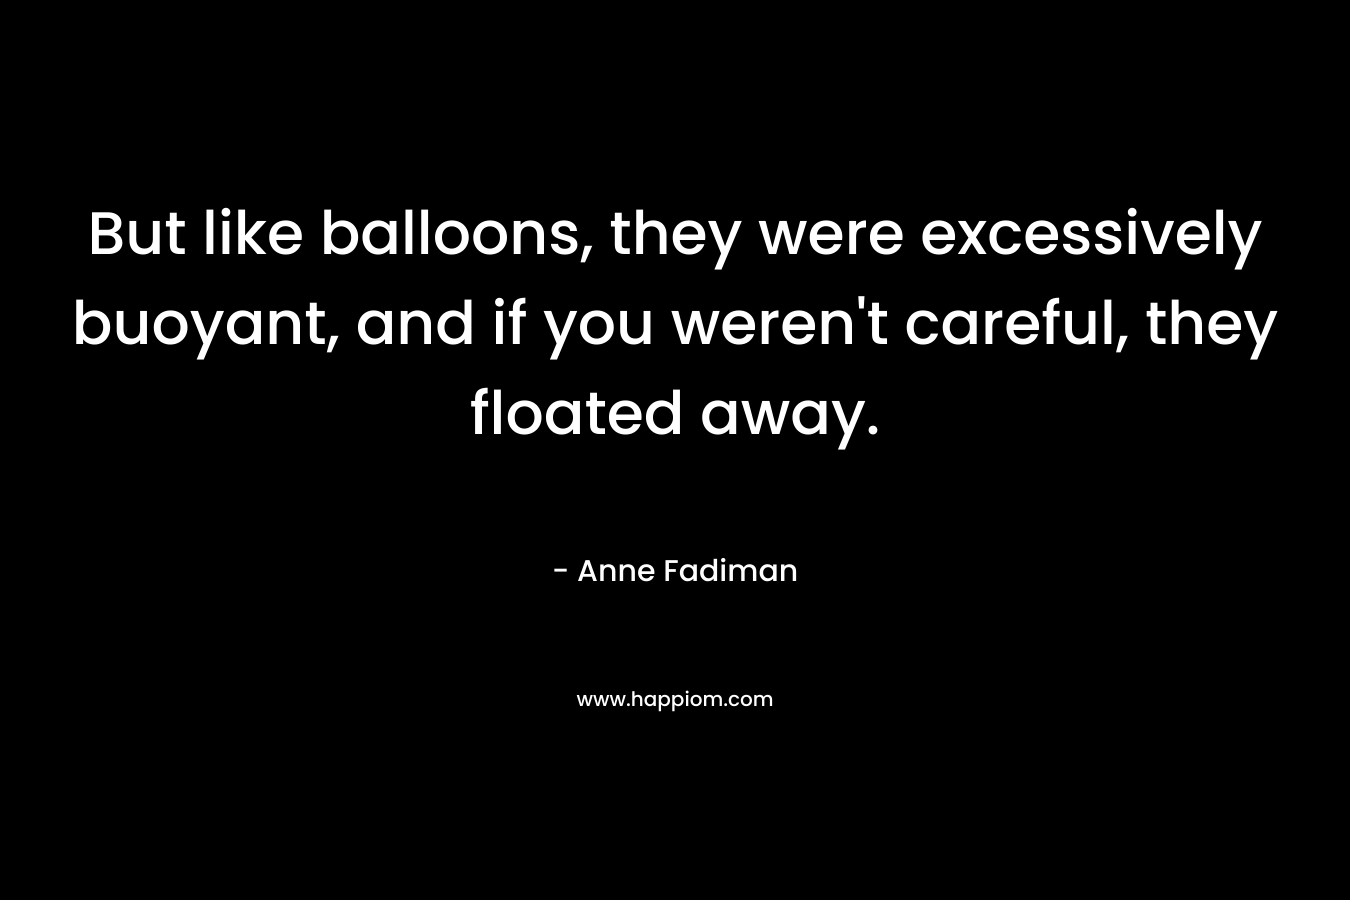 But like balloons, they were excessively buoyant, and if you weren’t careful, they floated away. – Anne Fadiman